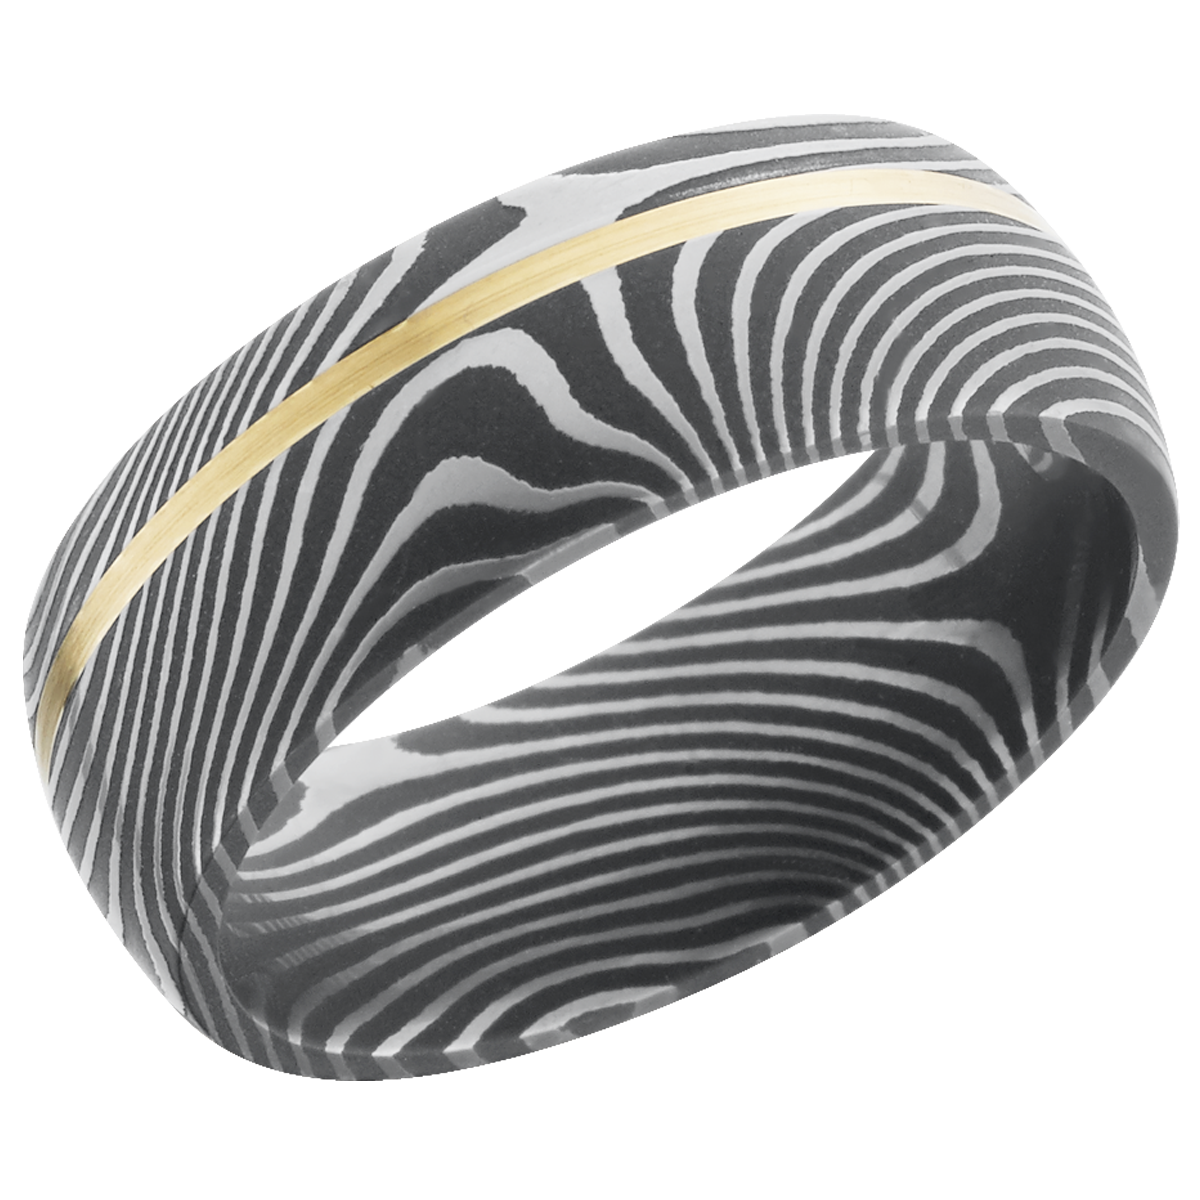 Damascus Flat Twist steel 8mm domed band with one inlay that 1mm wide set off center of 14k yellow